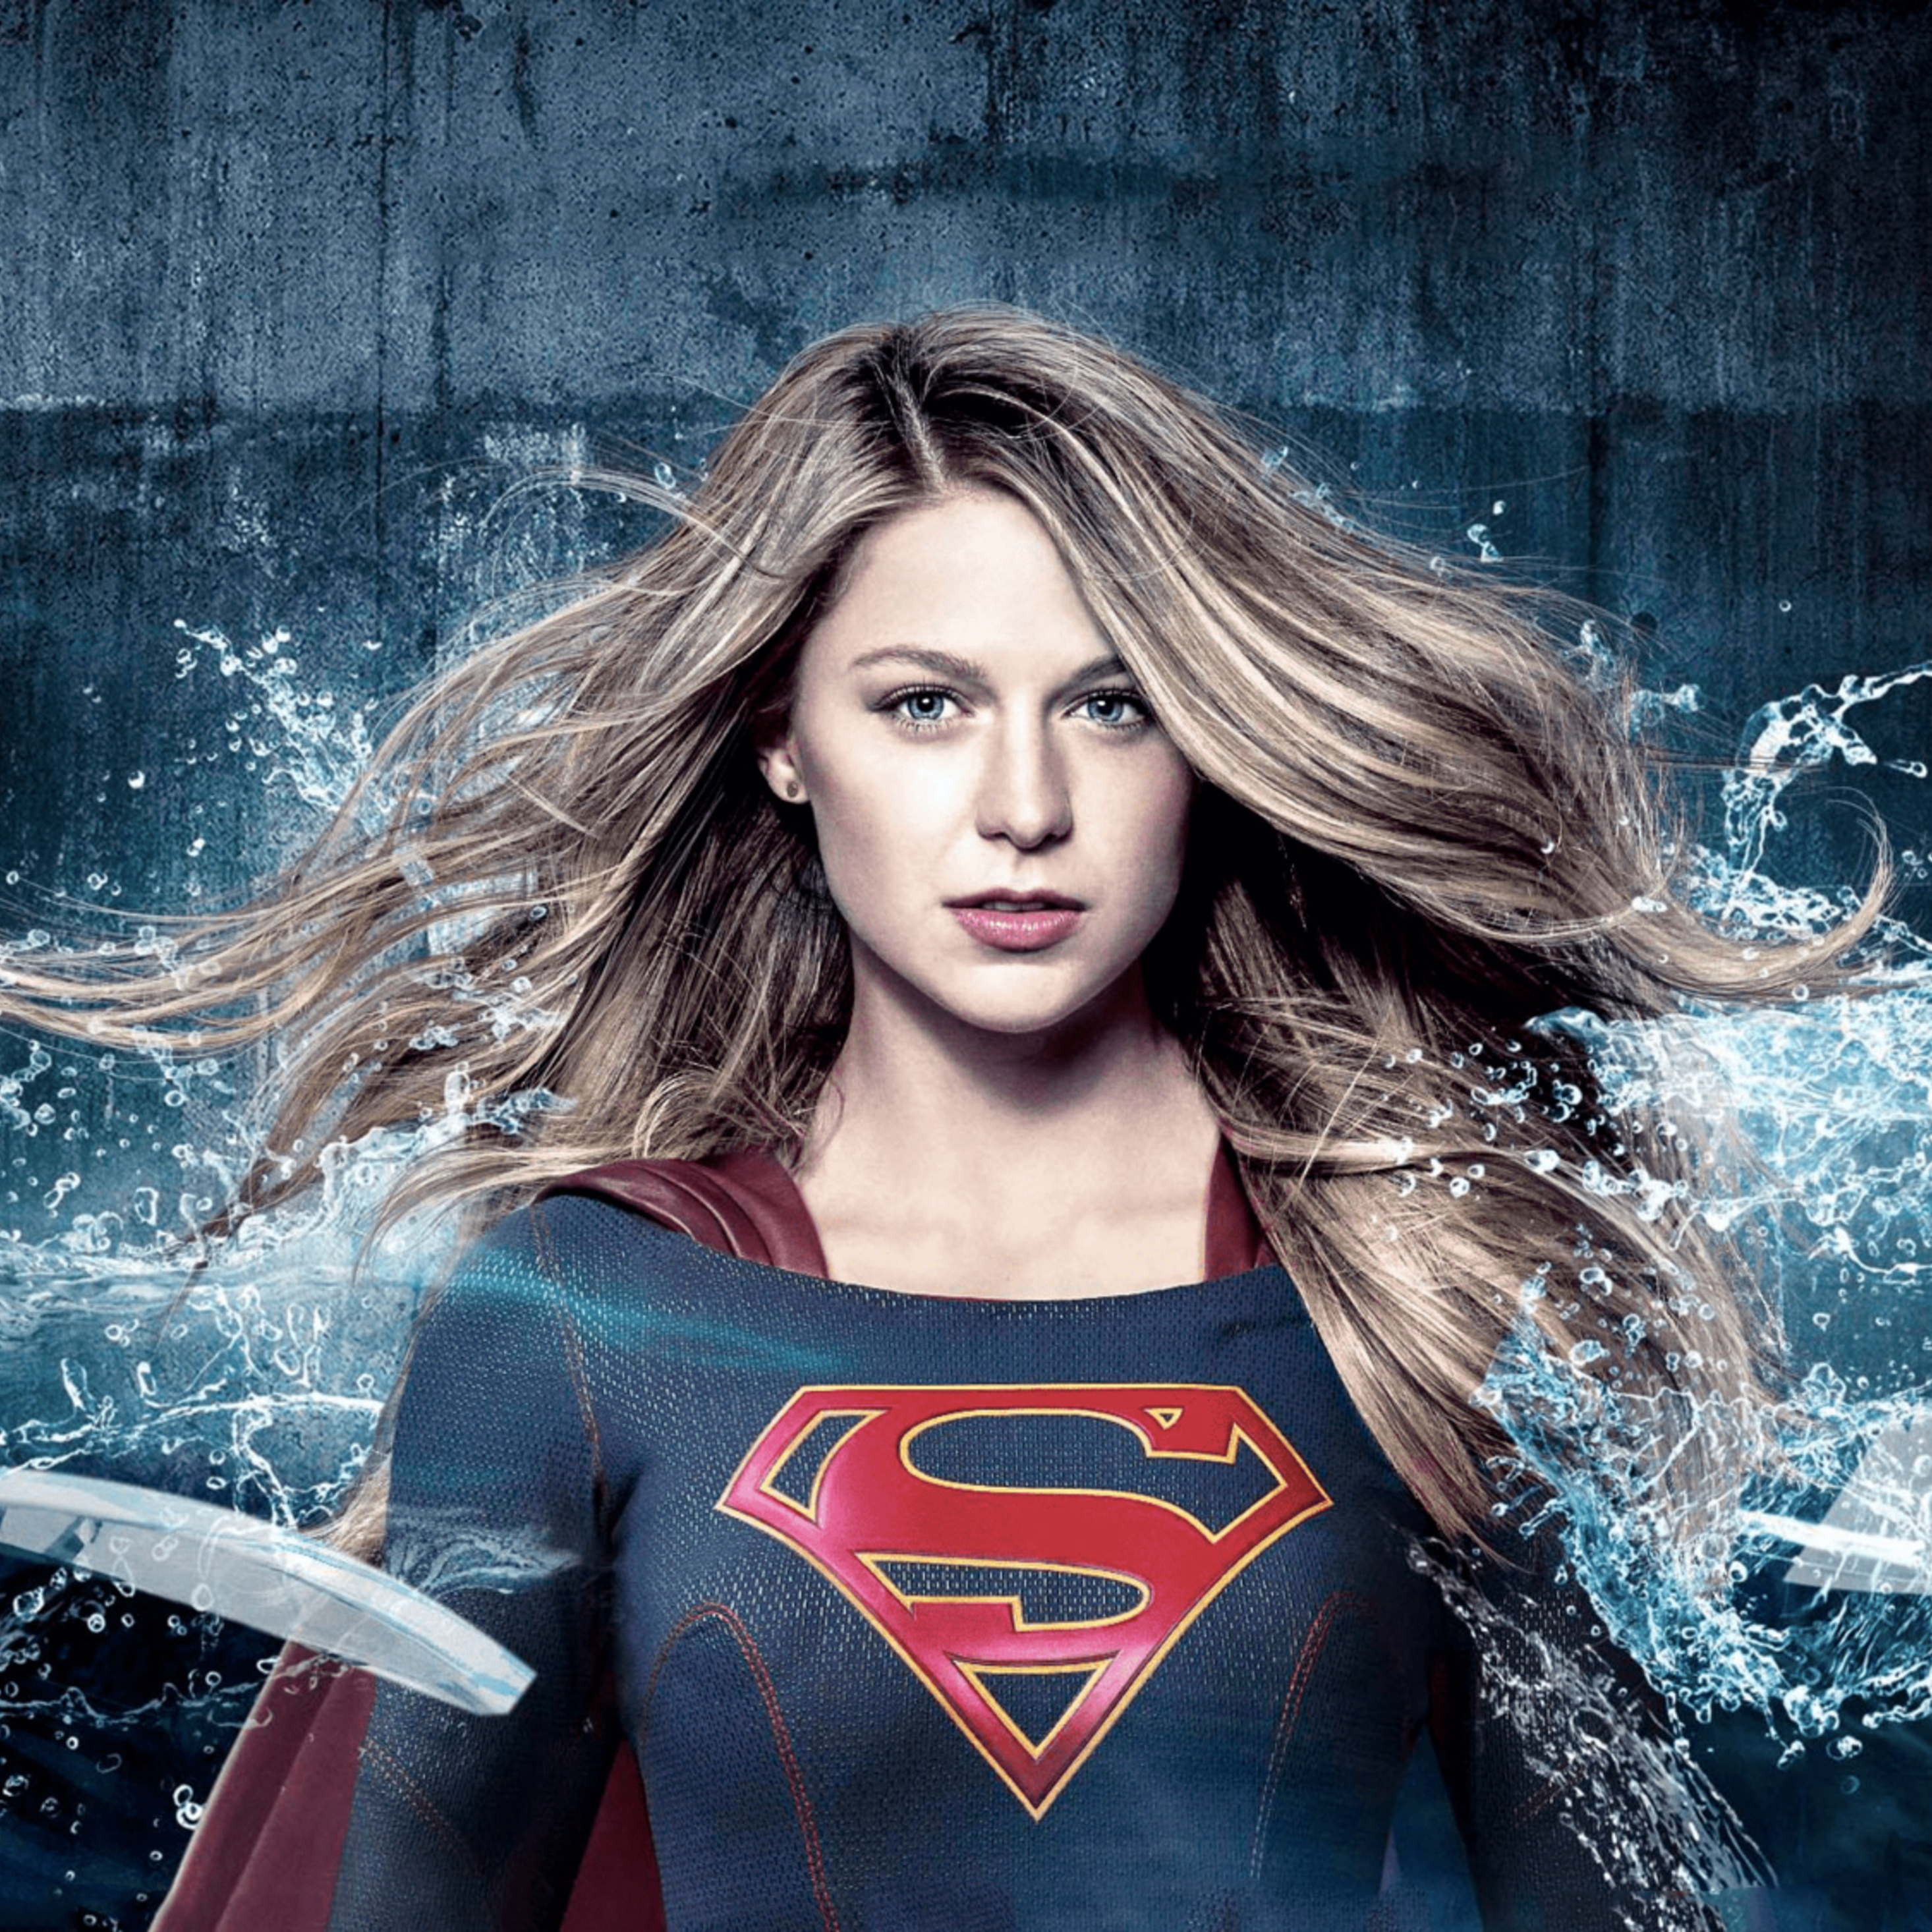 Supergirl Tv Show 2018 HD In 2932x2932 Resolution. supergirl-tv-show-2018-h...